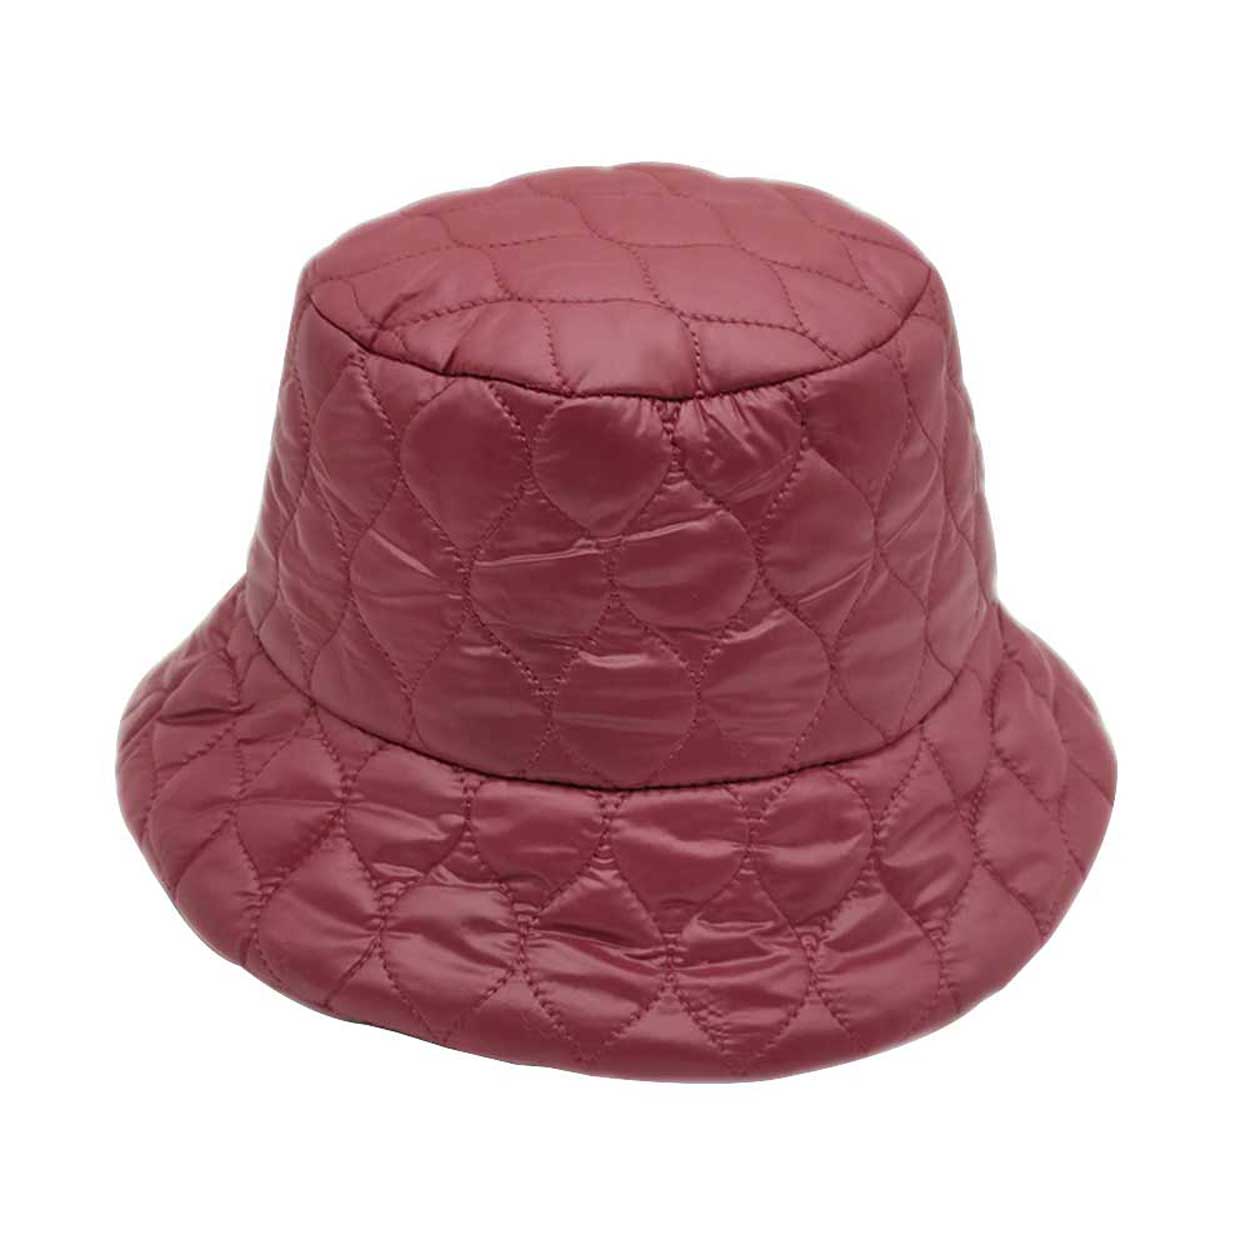 Burgundy Wave Padded Bucket Hat, Show your trendy side with this chic Wave Padded Bucket Hat. Have fun and look Stylish anywhere outdoors. Great for covering up when you are having a bad hair day. Perfect for protecting you from the sun, rain, wind, snow, beach, pool, camping, or any outdoor activities. Amps up your outlook with confidence with this trendy bucket hat.